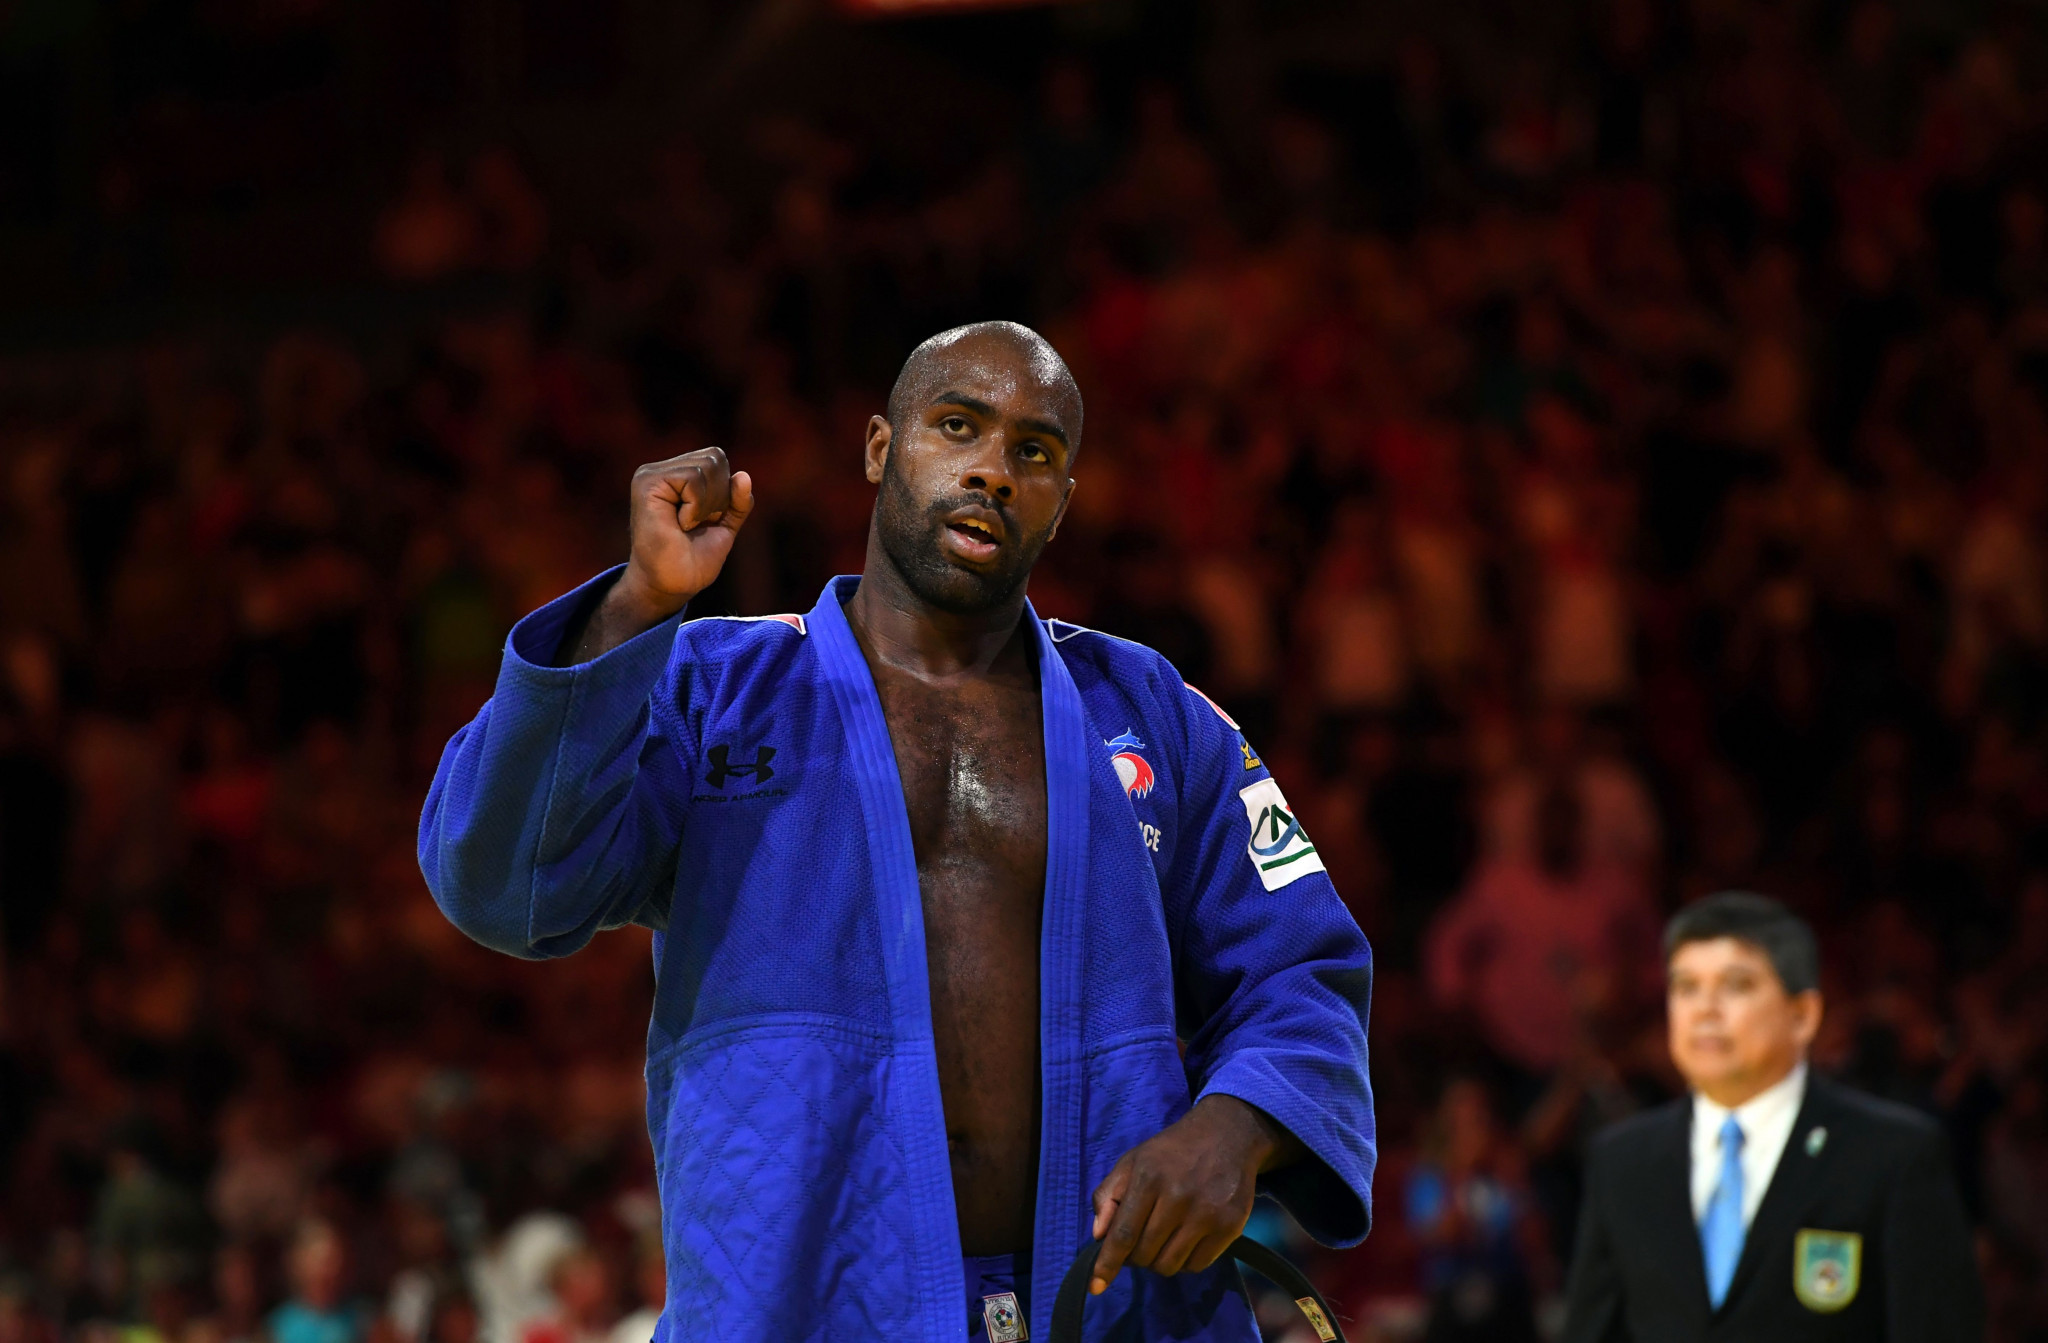 World champion Teddy Riner maintained his winning streak in Zagreb ©Getty Images